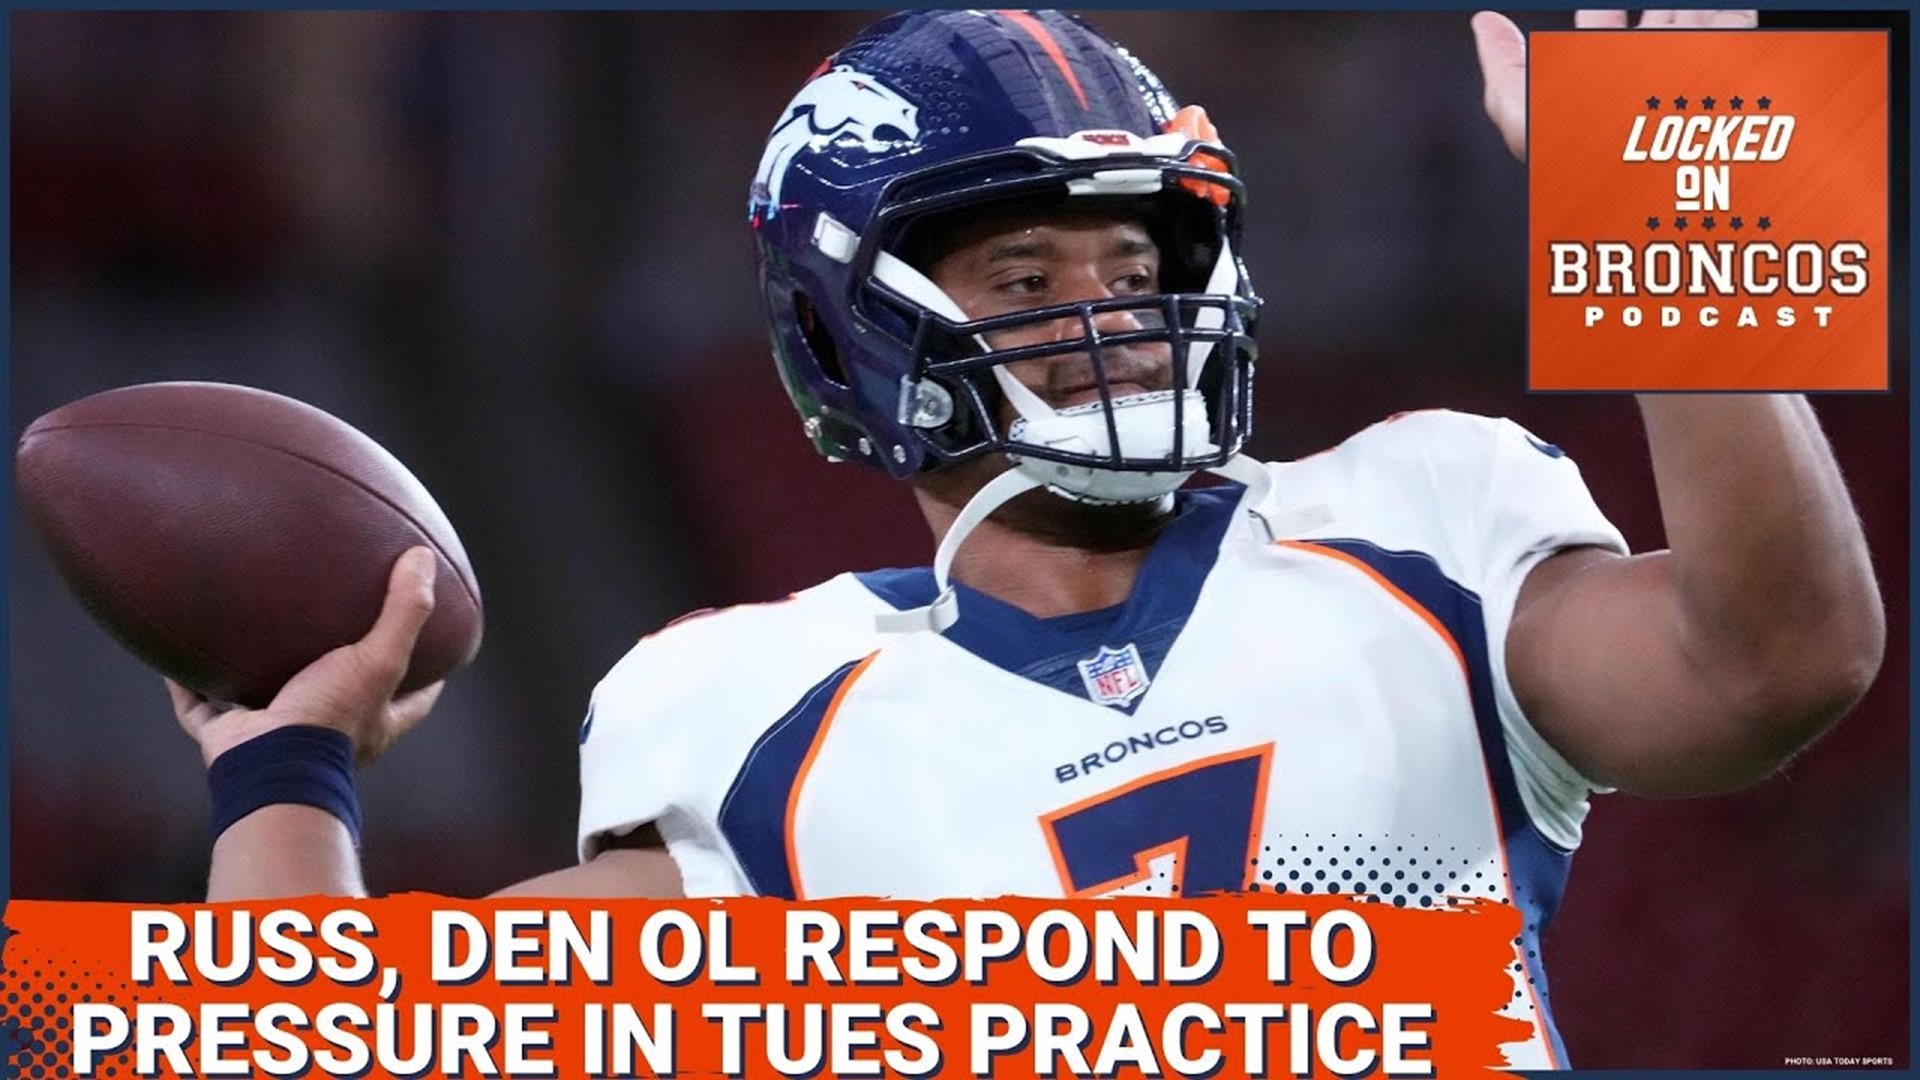 Denver Broncos quarterback Russell Wilson adjusted to pressure from the defense during Tuesday's practice.